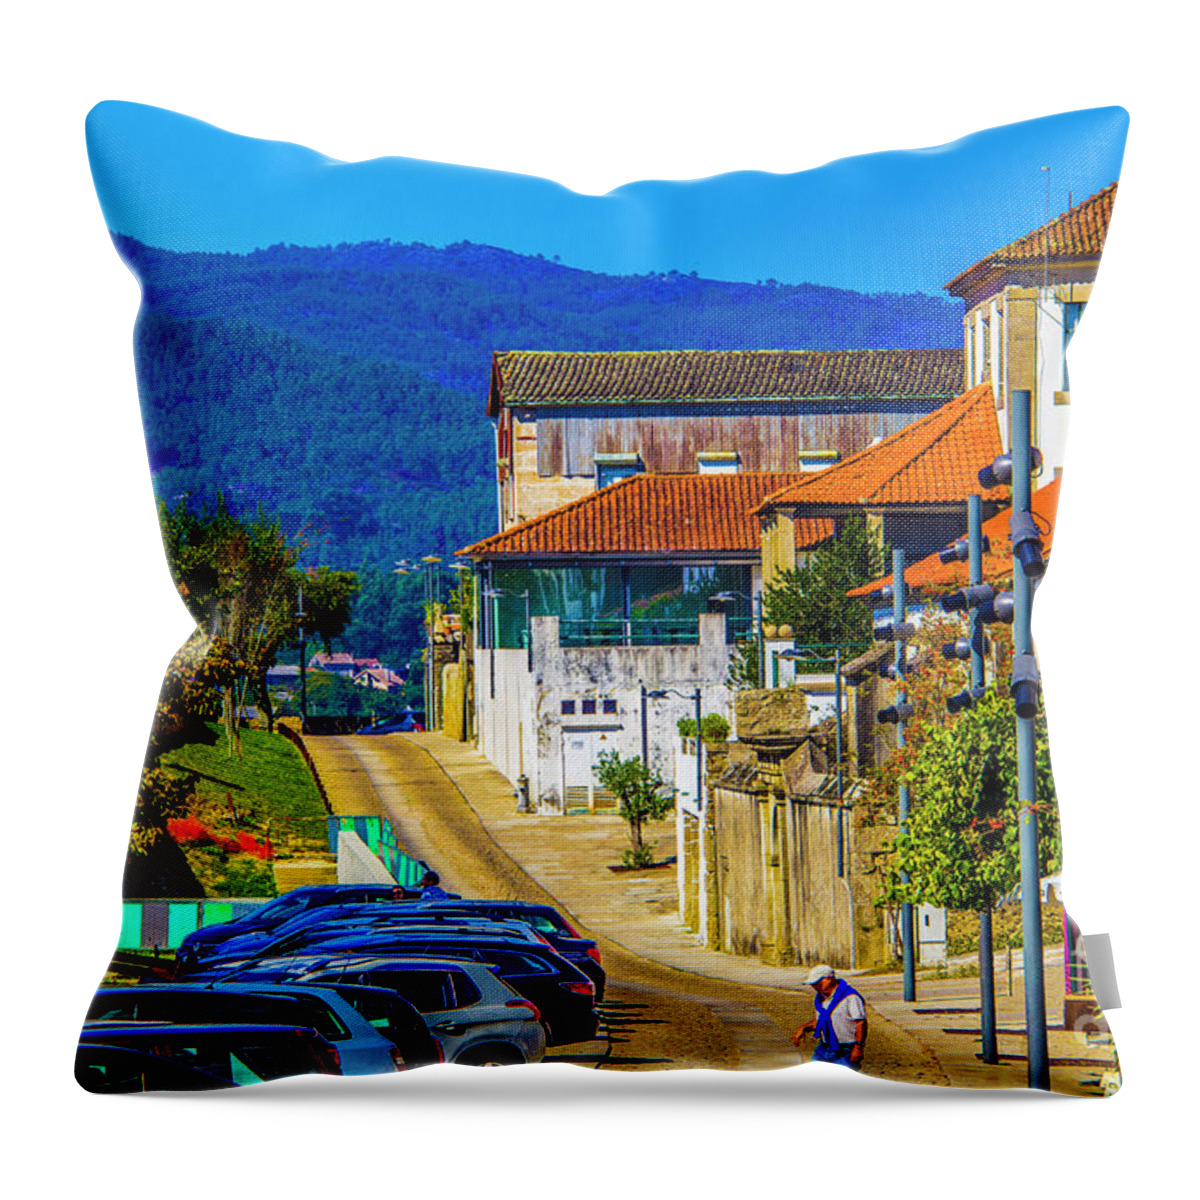 Valenca Throw Pillow featuring the photograph Outskirts of Valenca by Roberta Bragan